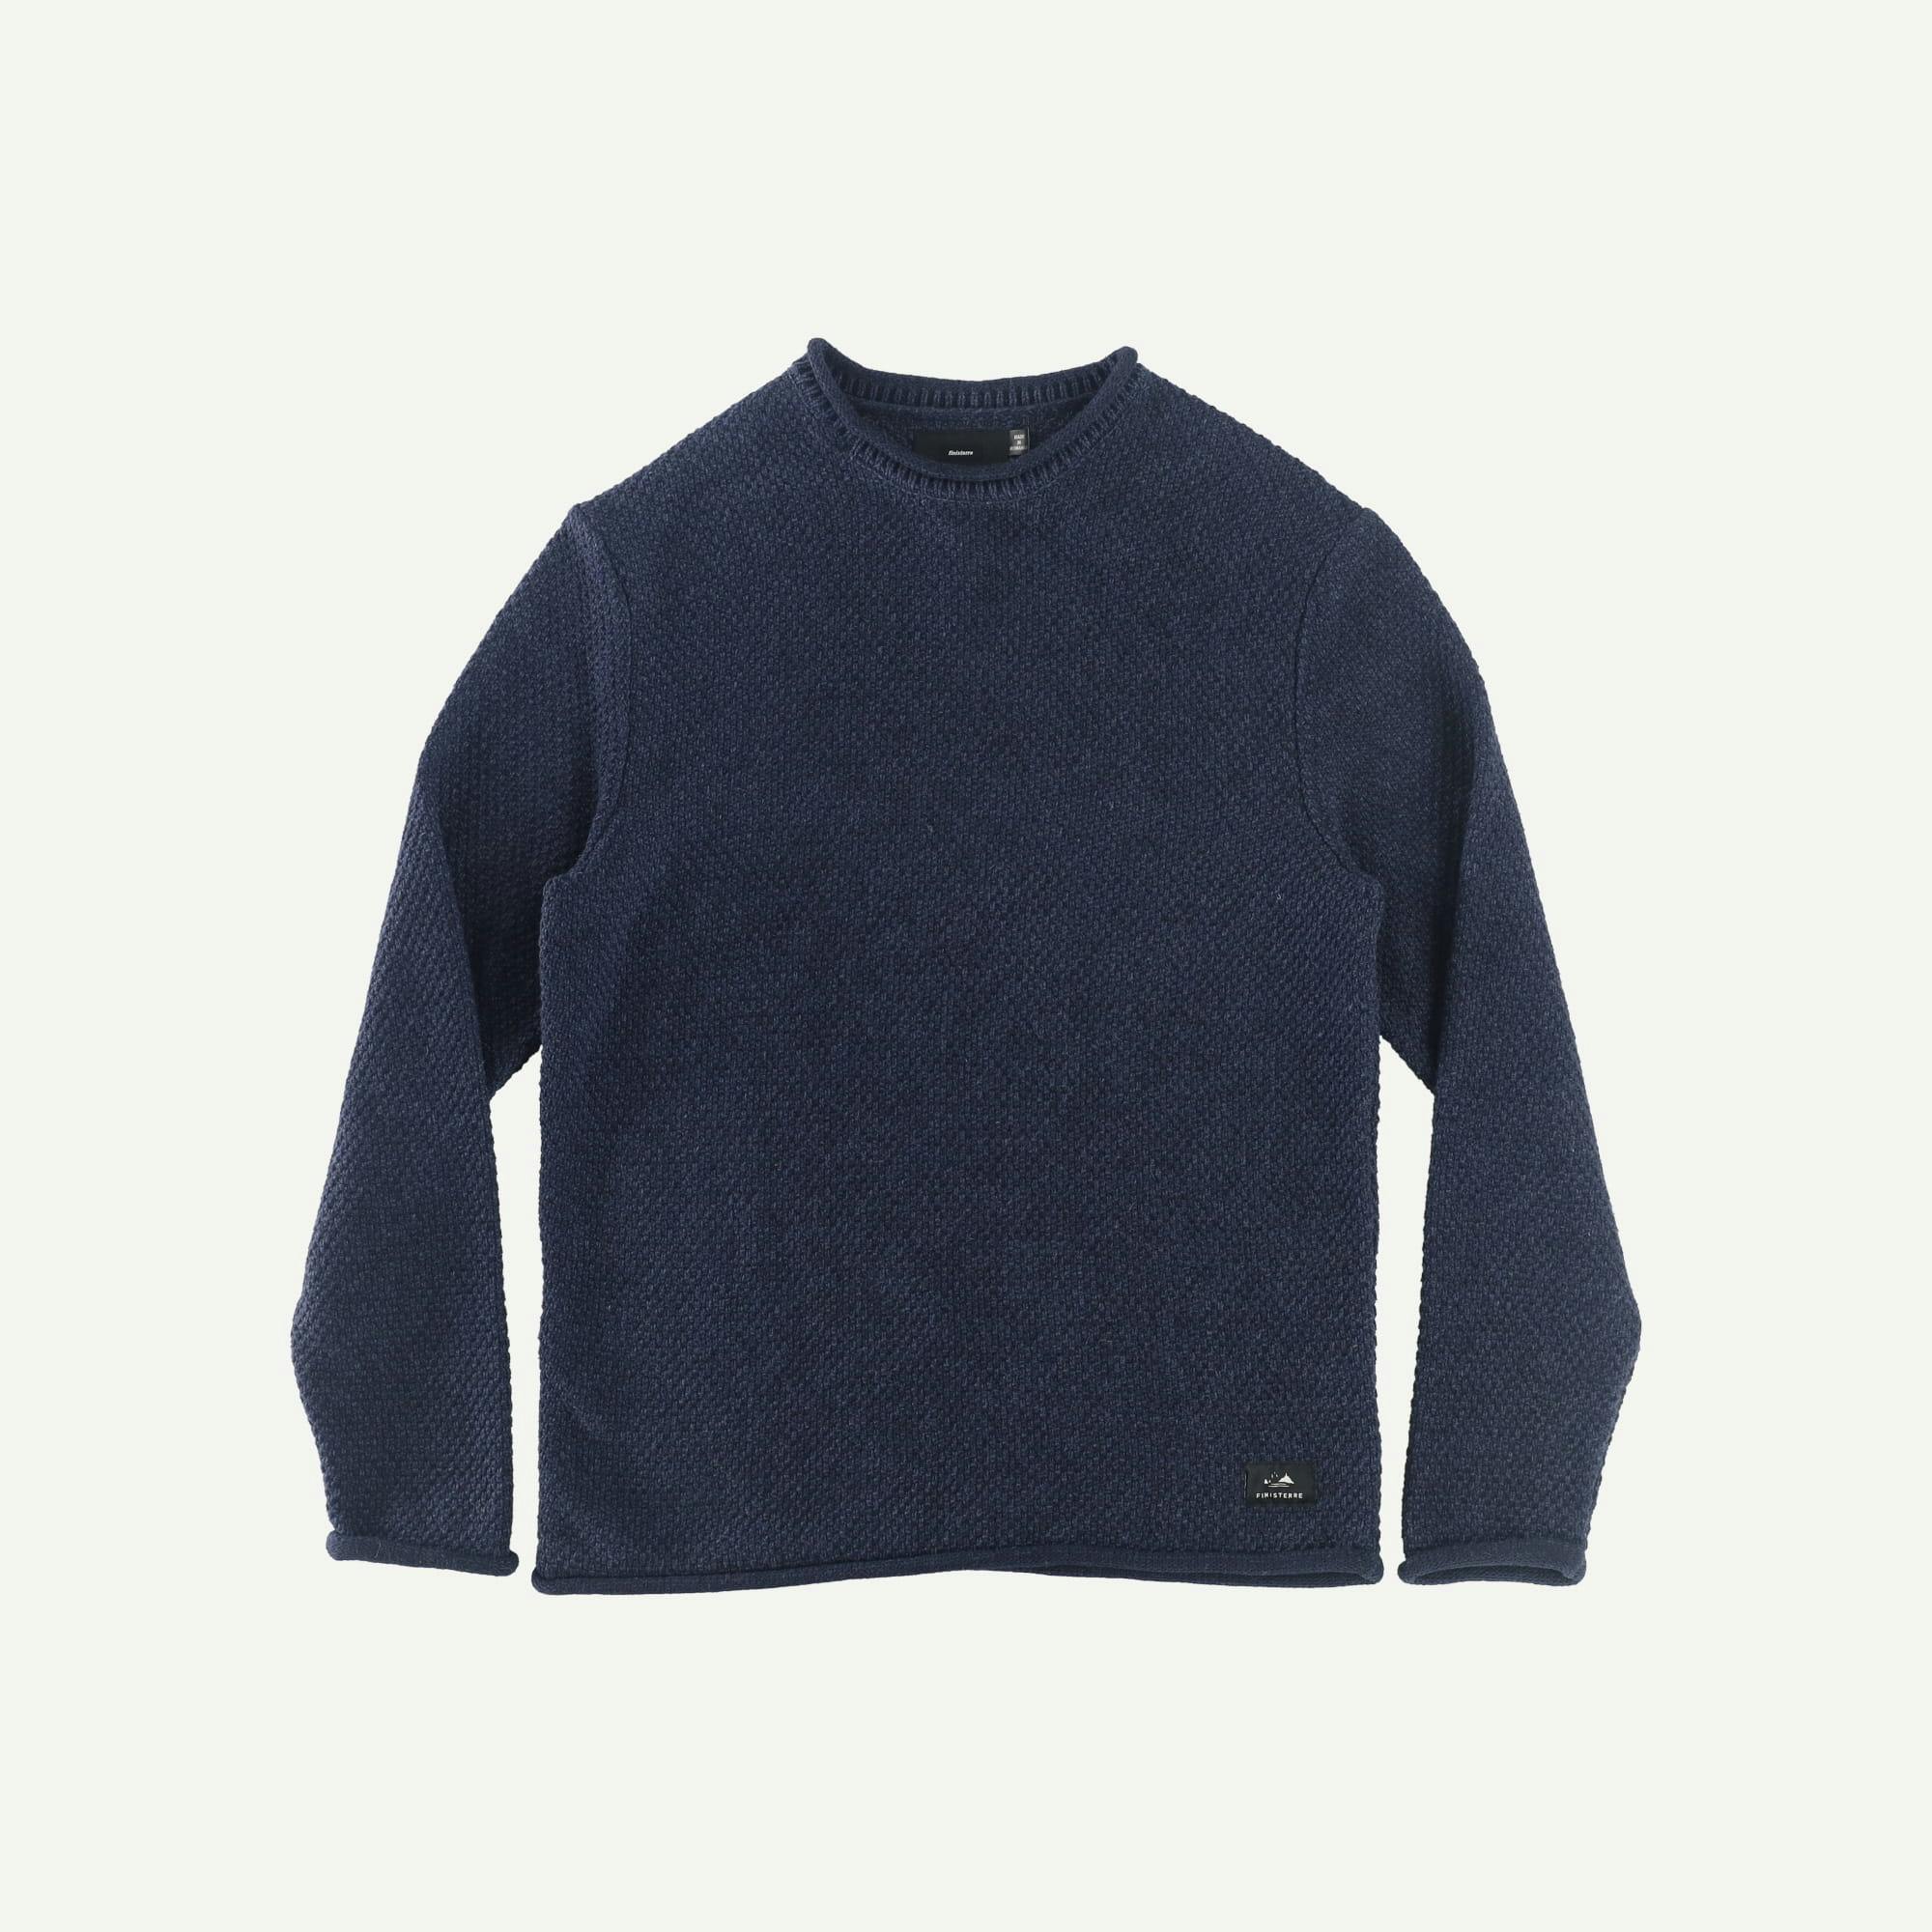 Finisterre As new Navy Barents Jumper